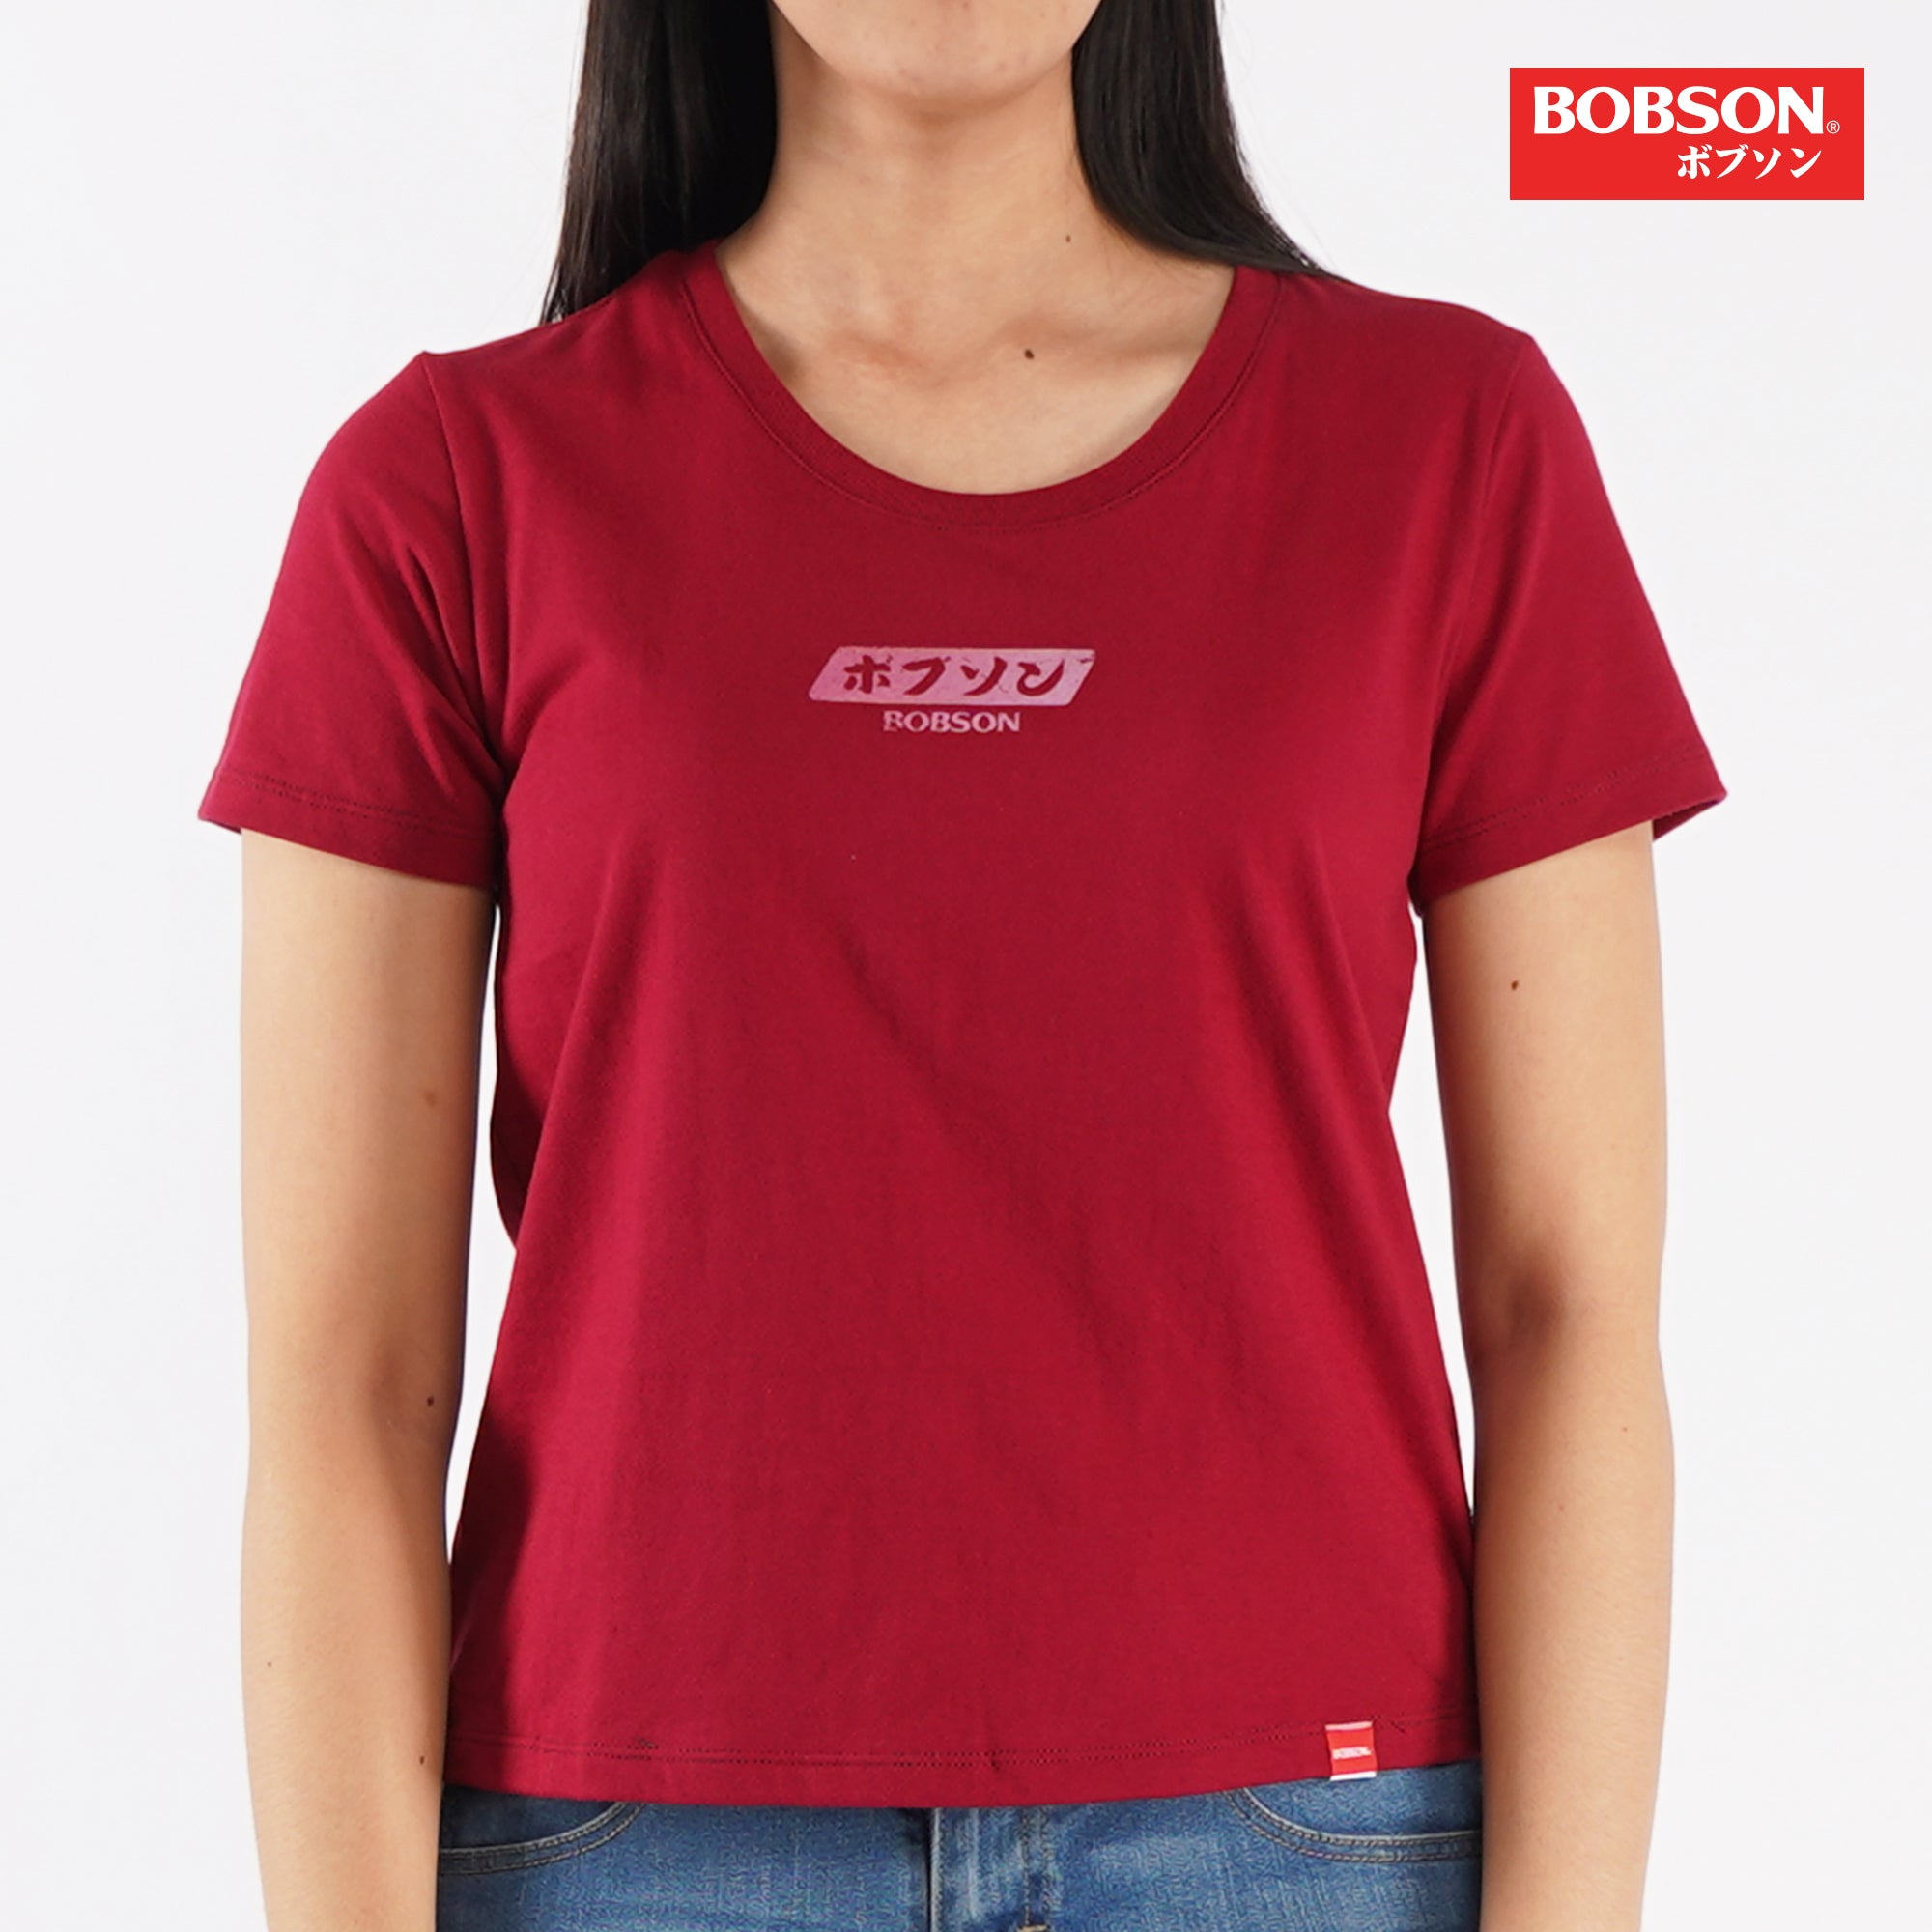 Bobson Japanese Ladies Basic Round Neck shirt for Women Trendy Fashion High Quality Apparel Comfortable Casual Top for Women Boxy Fit 133322-U (Rumba Red)